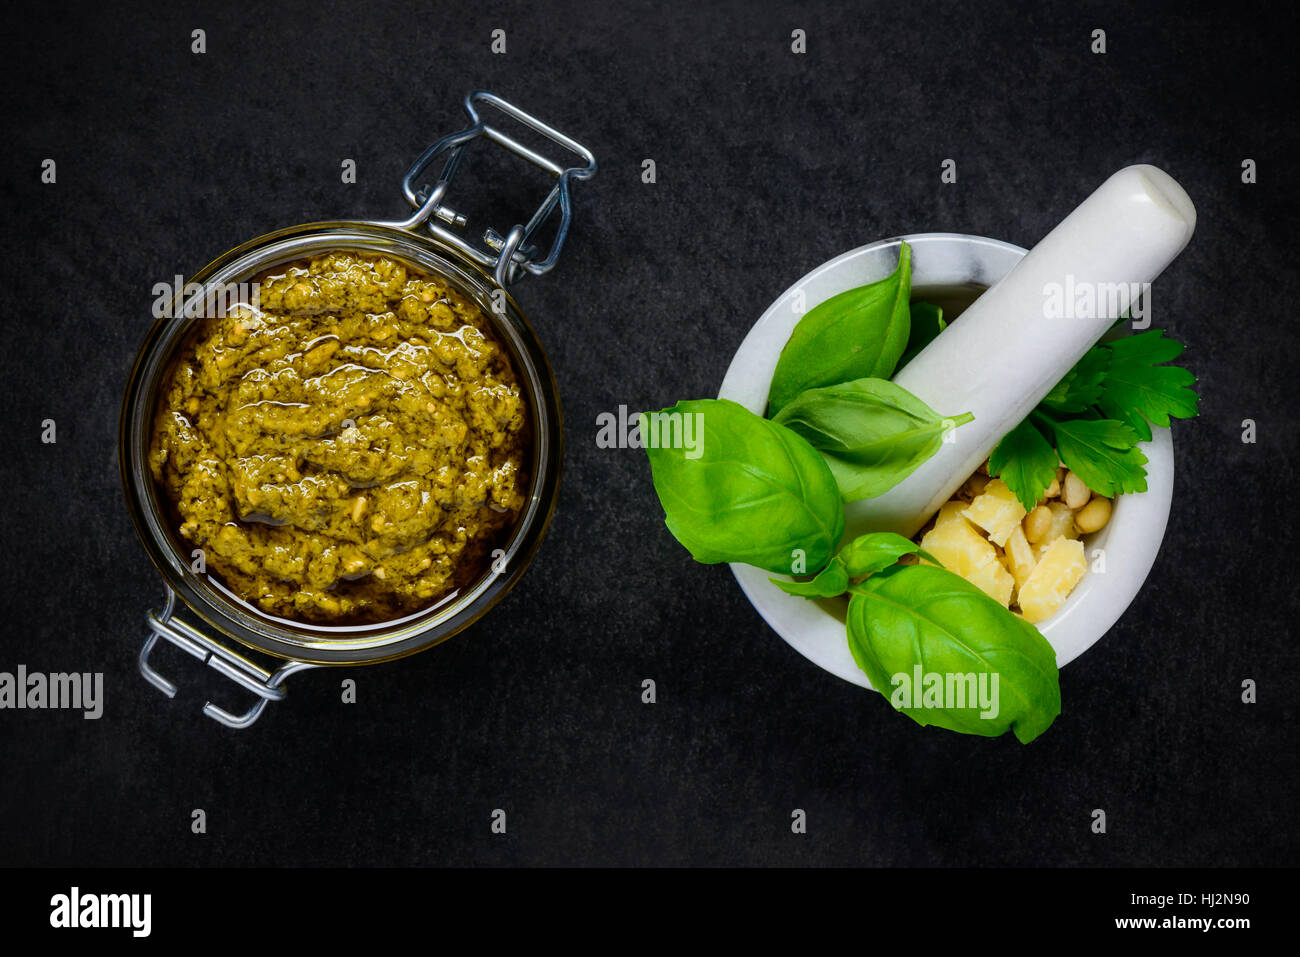 Top View of Green Pesto with Pestle and Mortar with Basil, Cheese and Pine Nuts Stock Photo